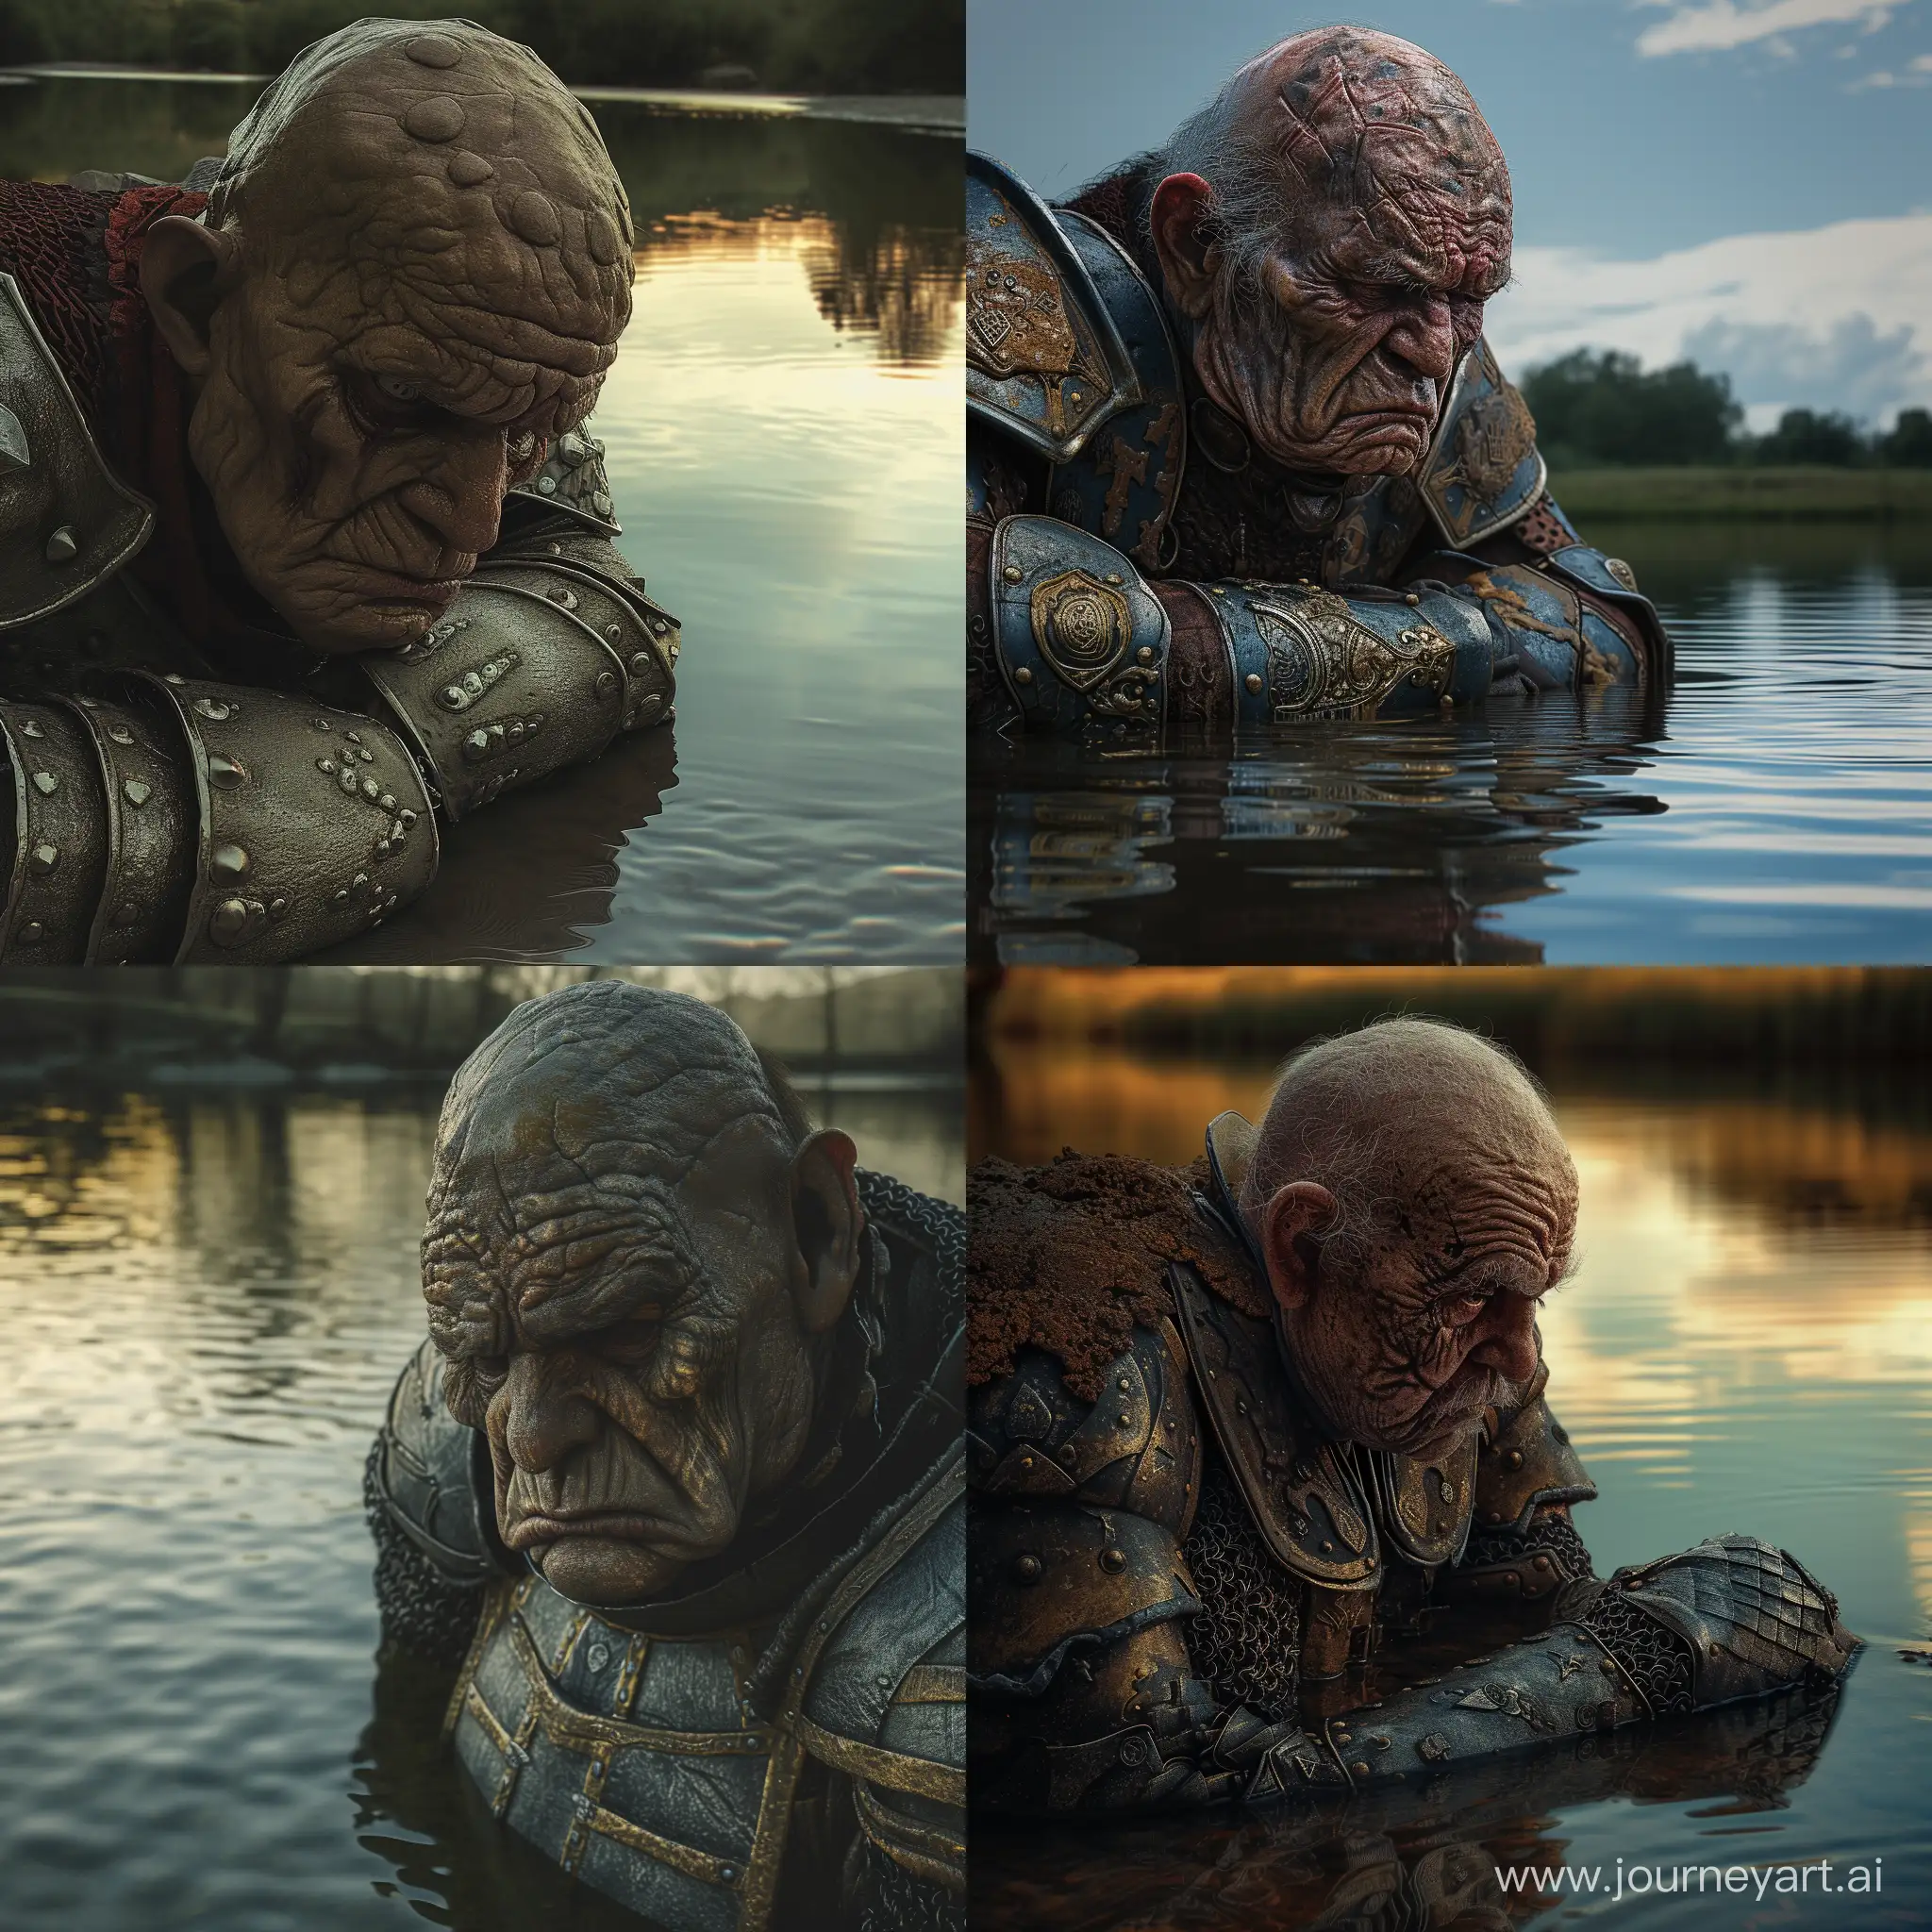 old hulk  from the Middle Ages wearing armor, sad, with sad features that appear in his eyes,setting in front of the edge of the river, with reflections in the surface of the water, in a beautiful artistic, realistic Photoshop   --v 6